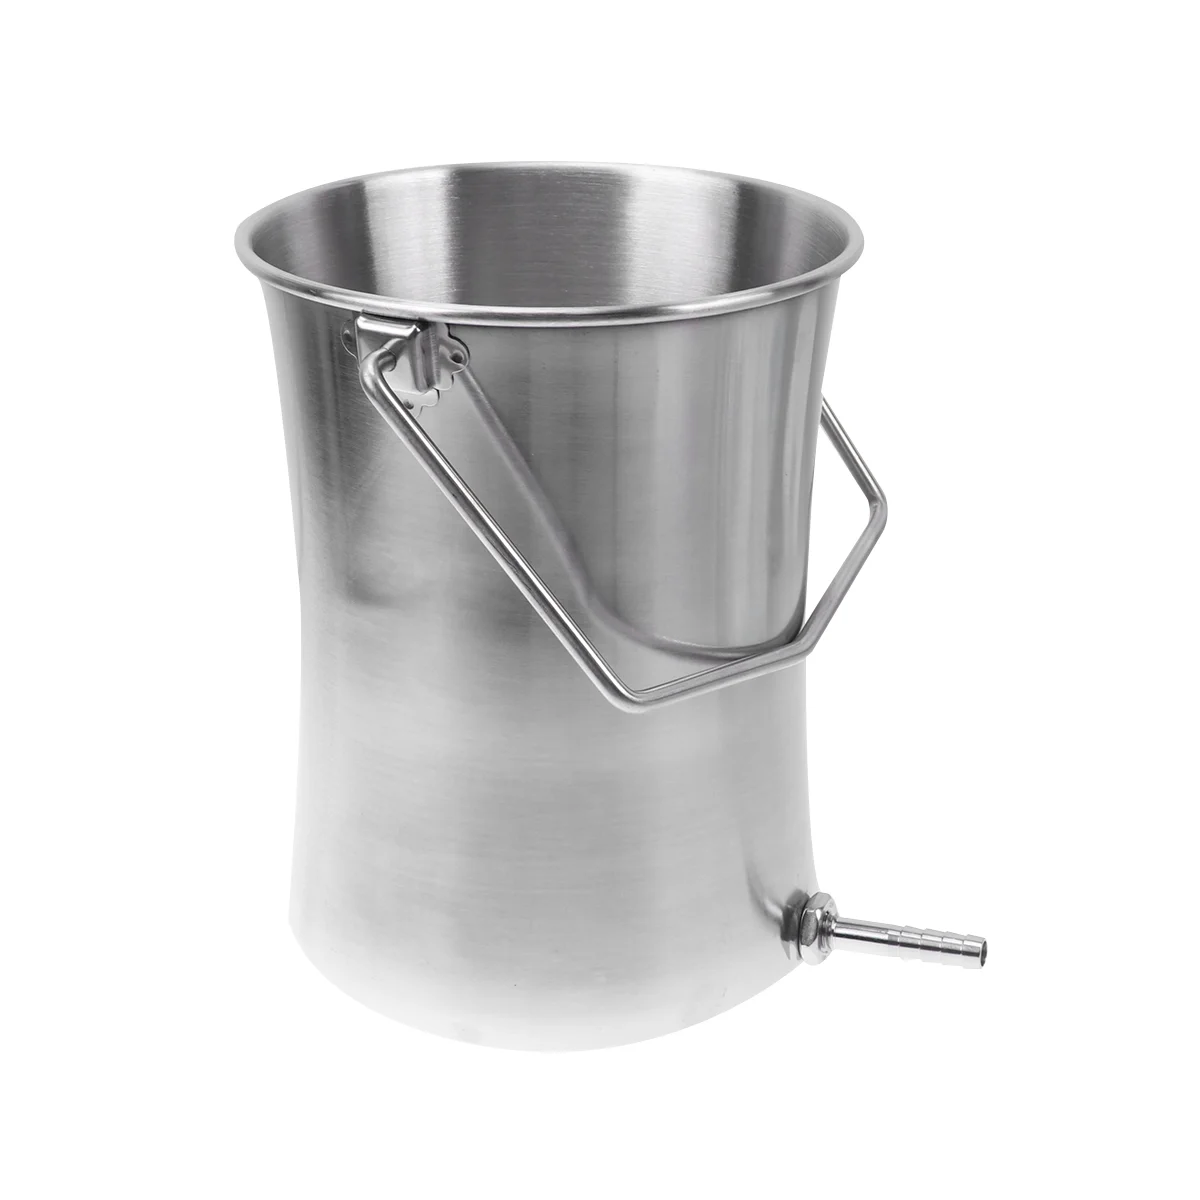 1 Set Cleaning Buckets For Household Use Enema 2L Barrel Tool